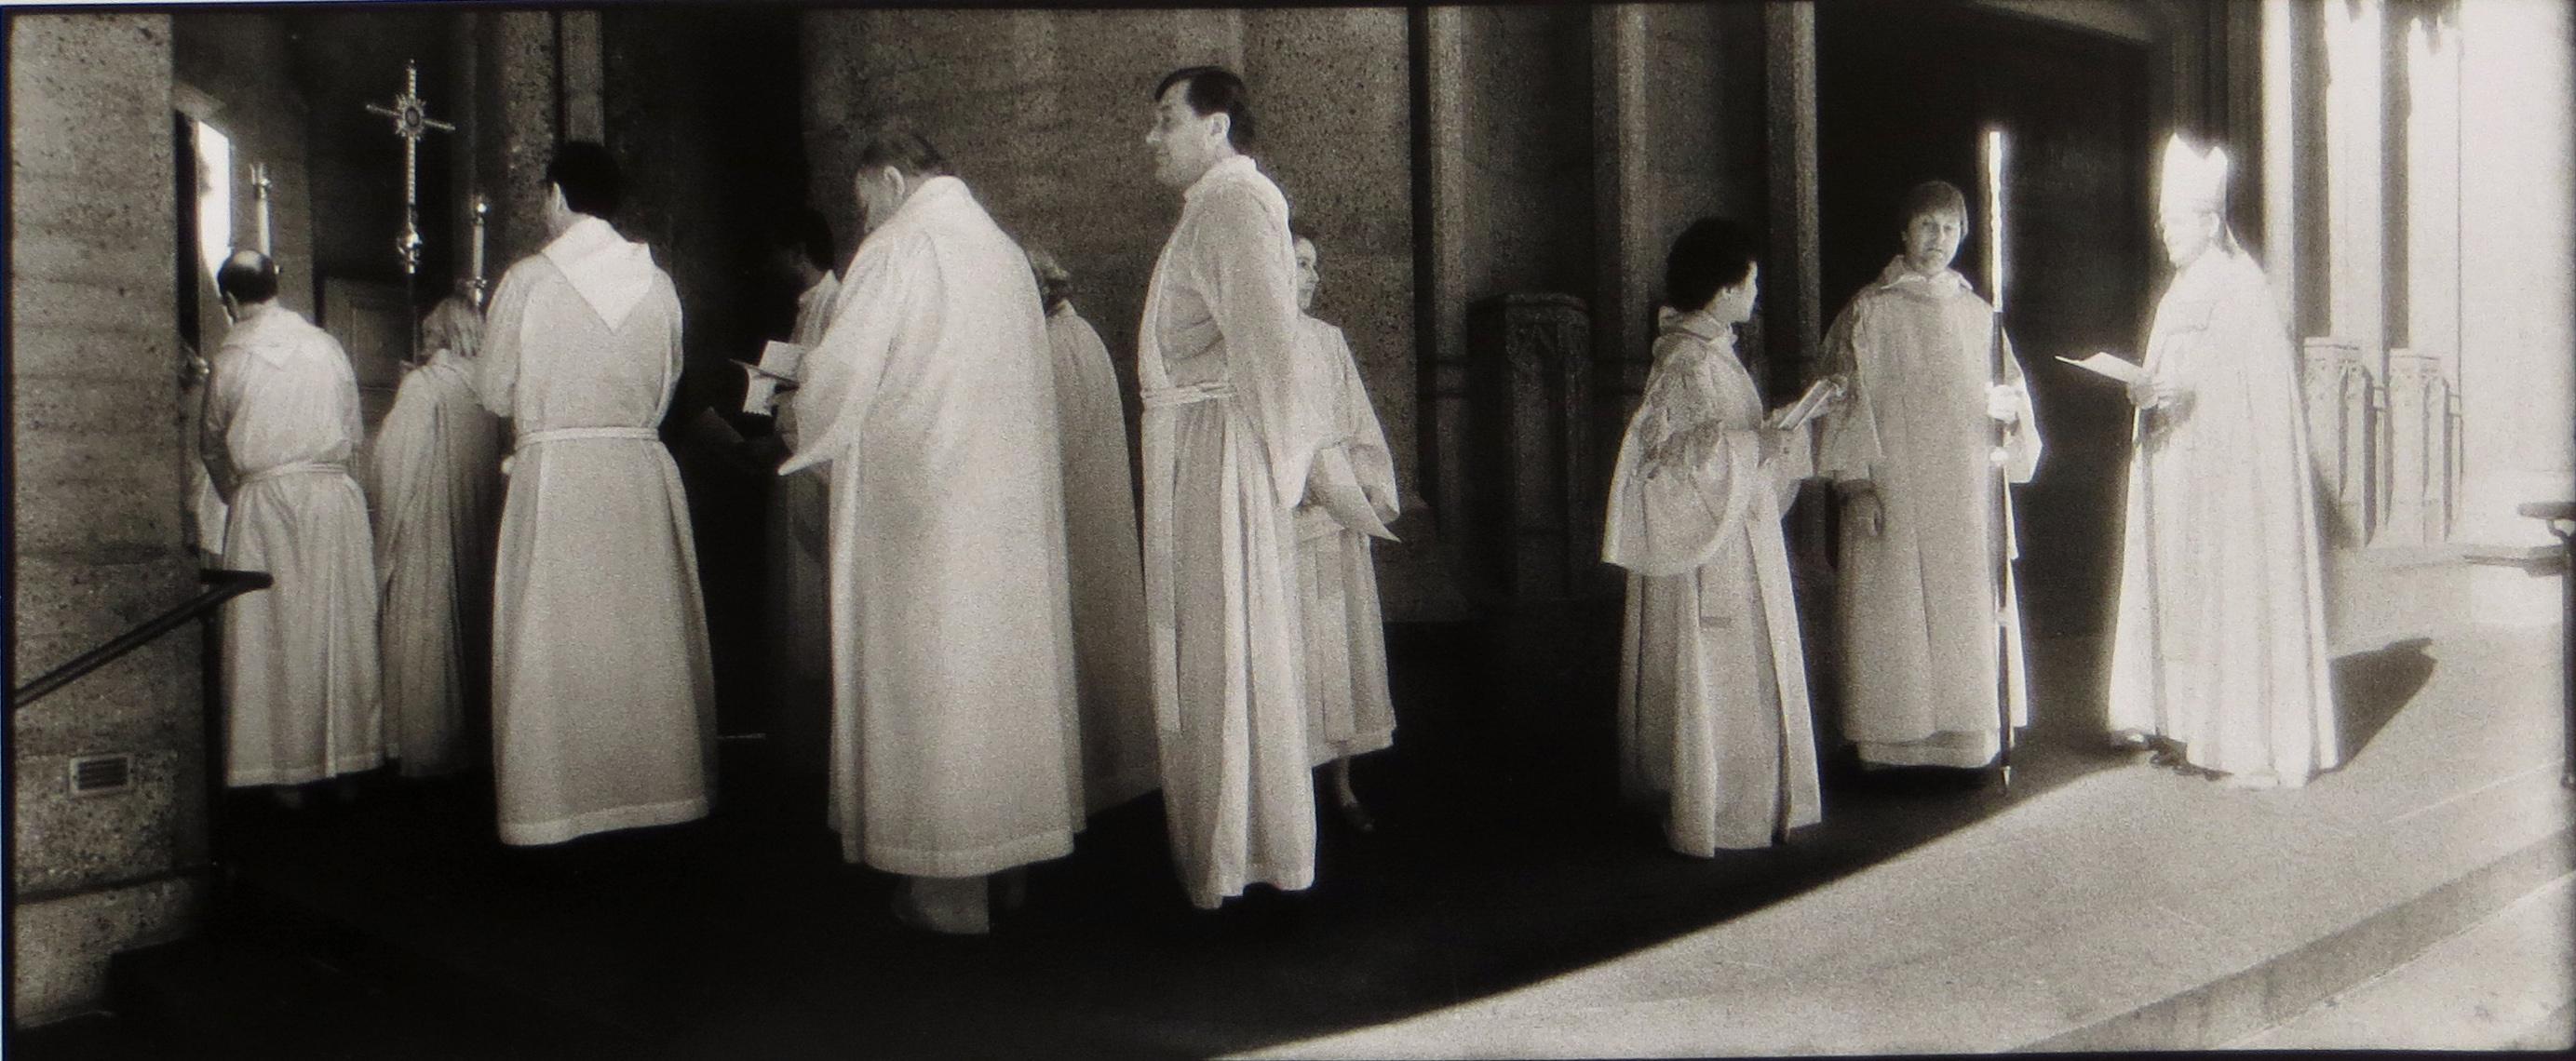 Geir Jordahl Black and White Photograph – Ecumenisches Service, Grace Cathedral, San Francisco